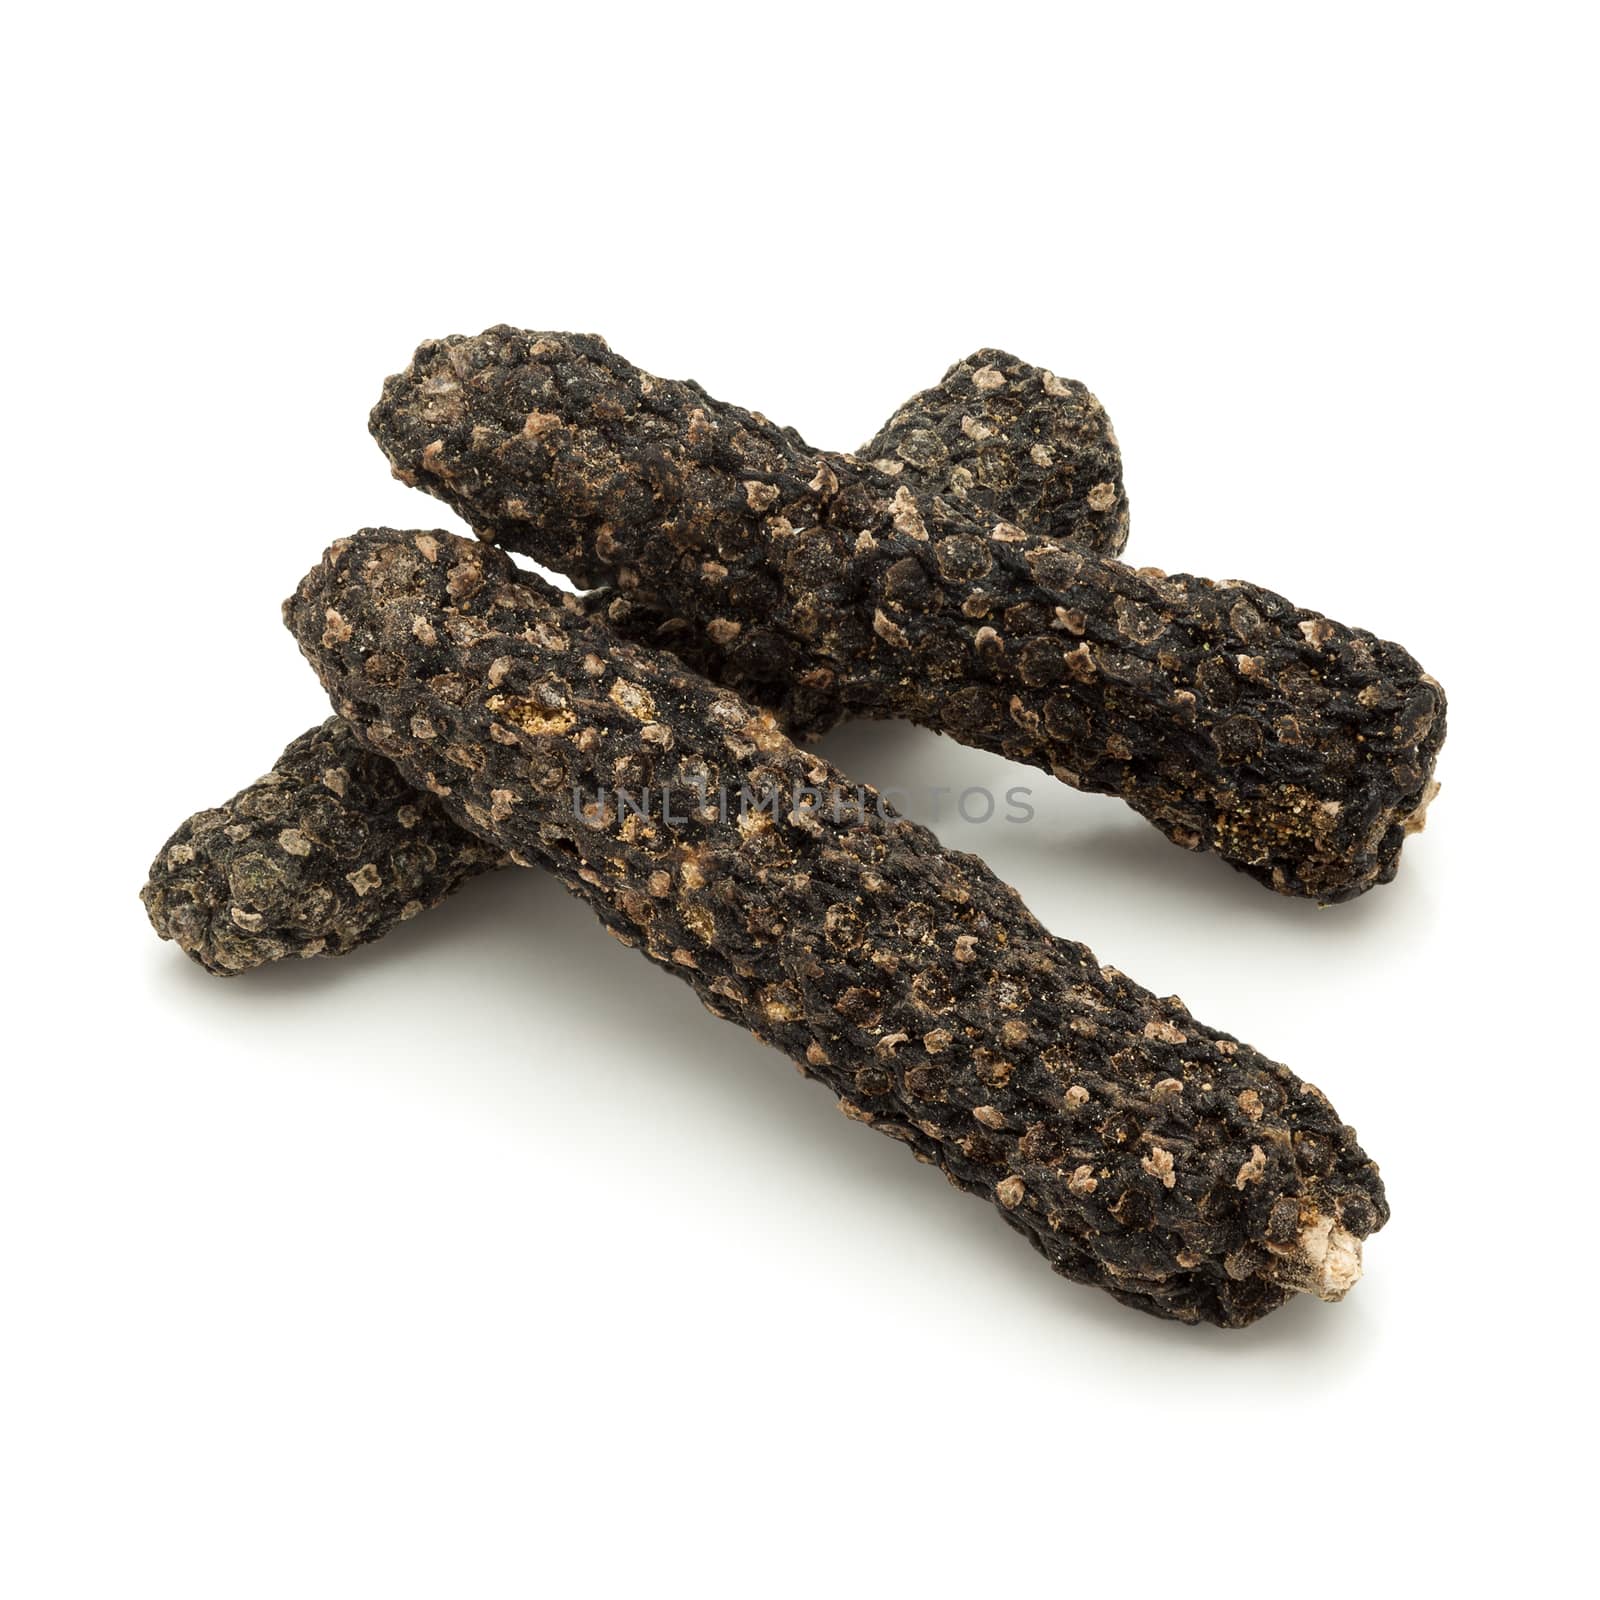 Macro closeup of Organic Long pepper Dried Fruit (Piper longum) isolated on white background.